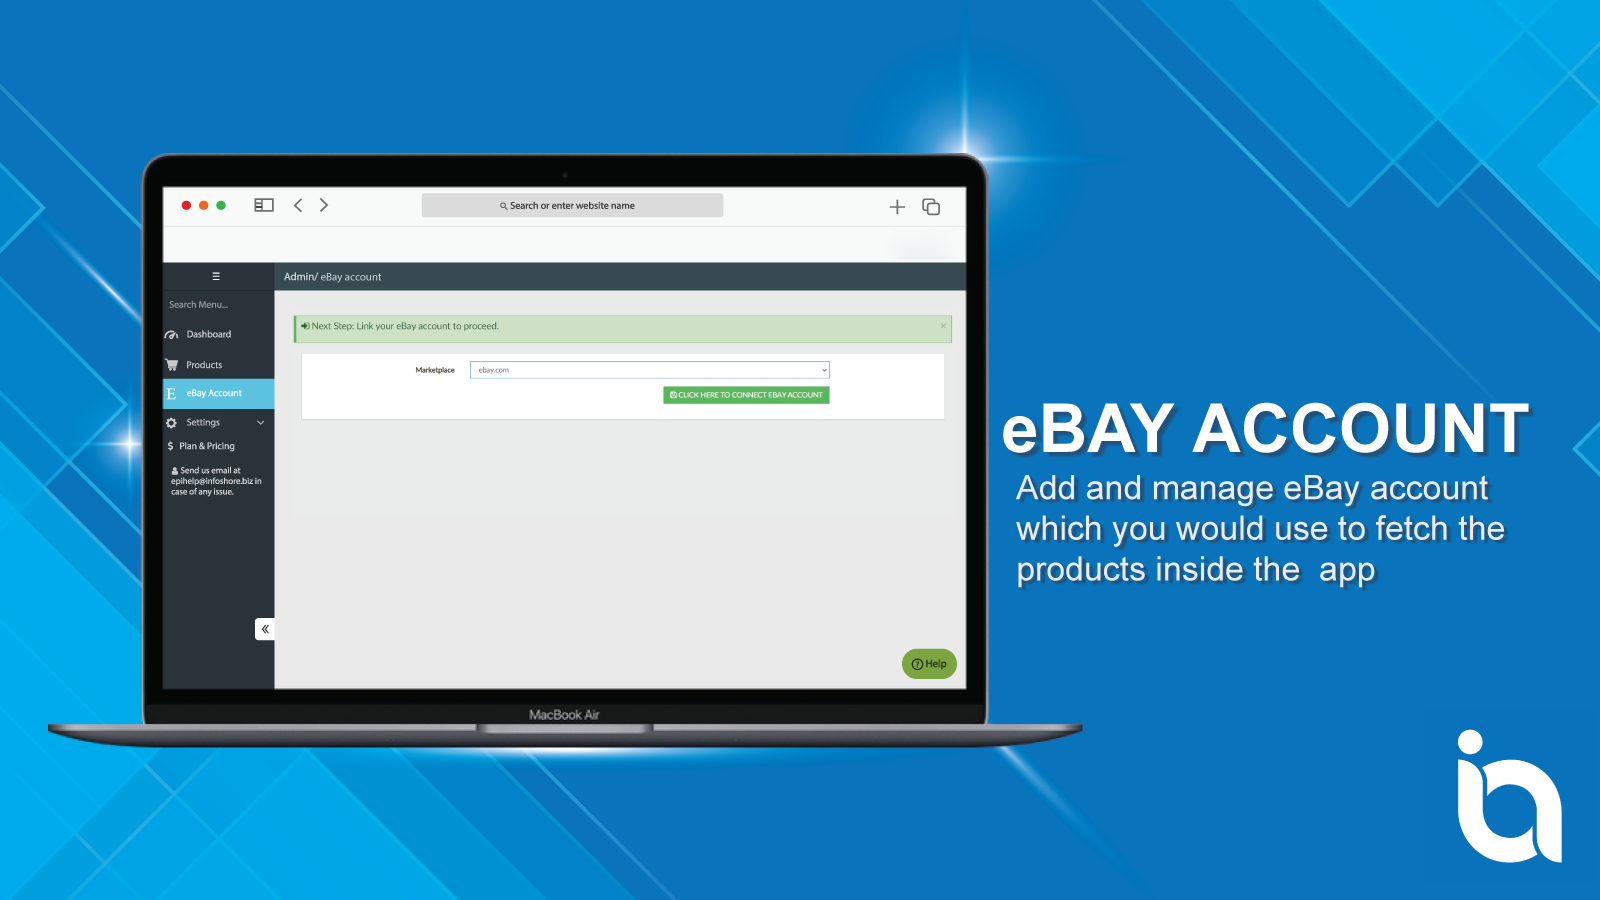 Authorize eBay account in app to fetch listings.